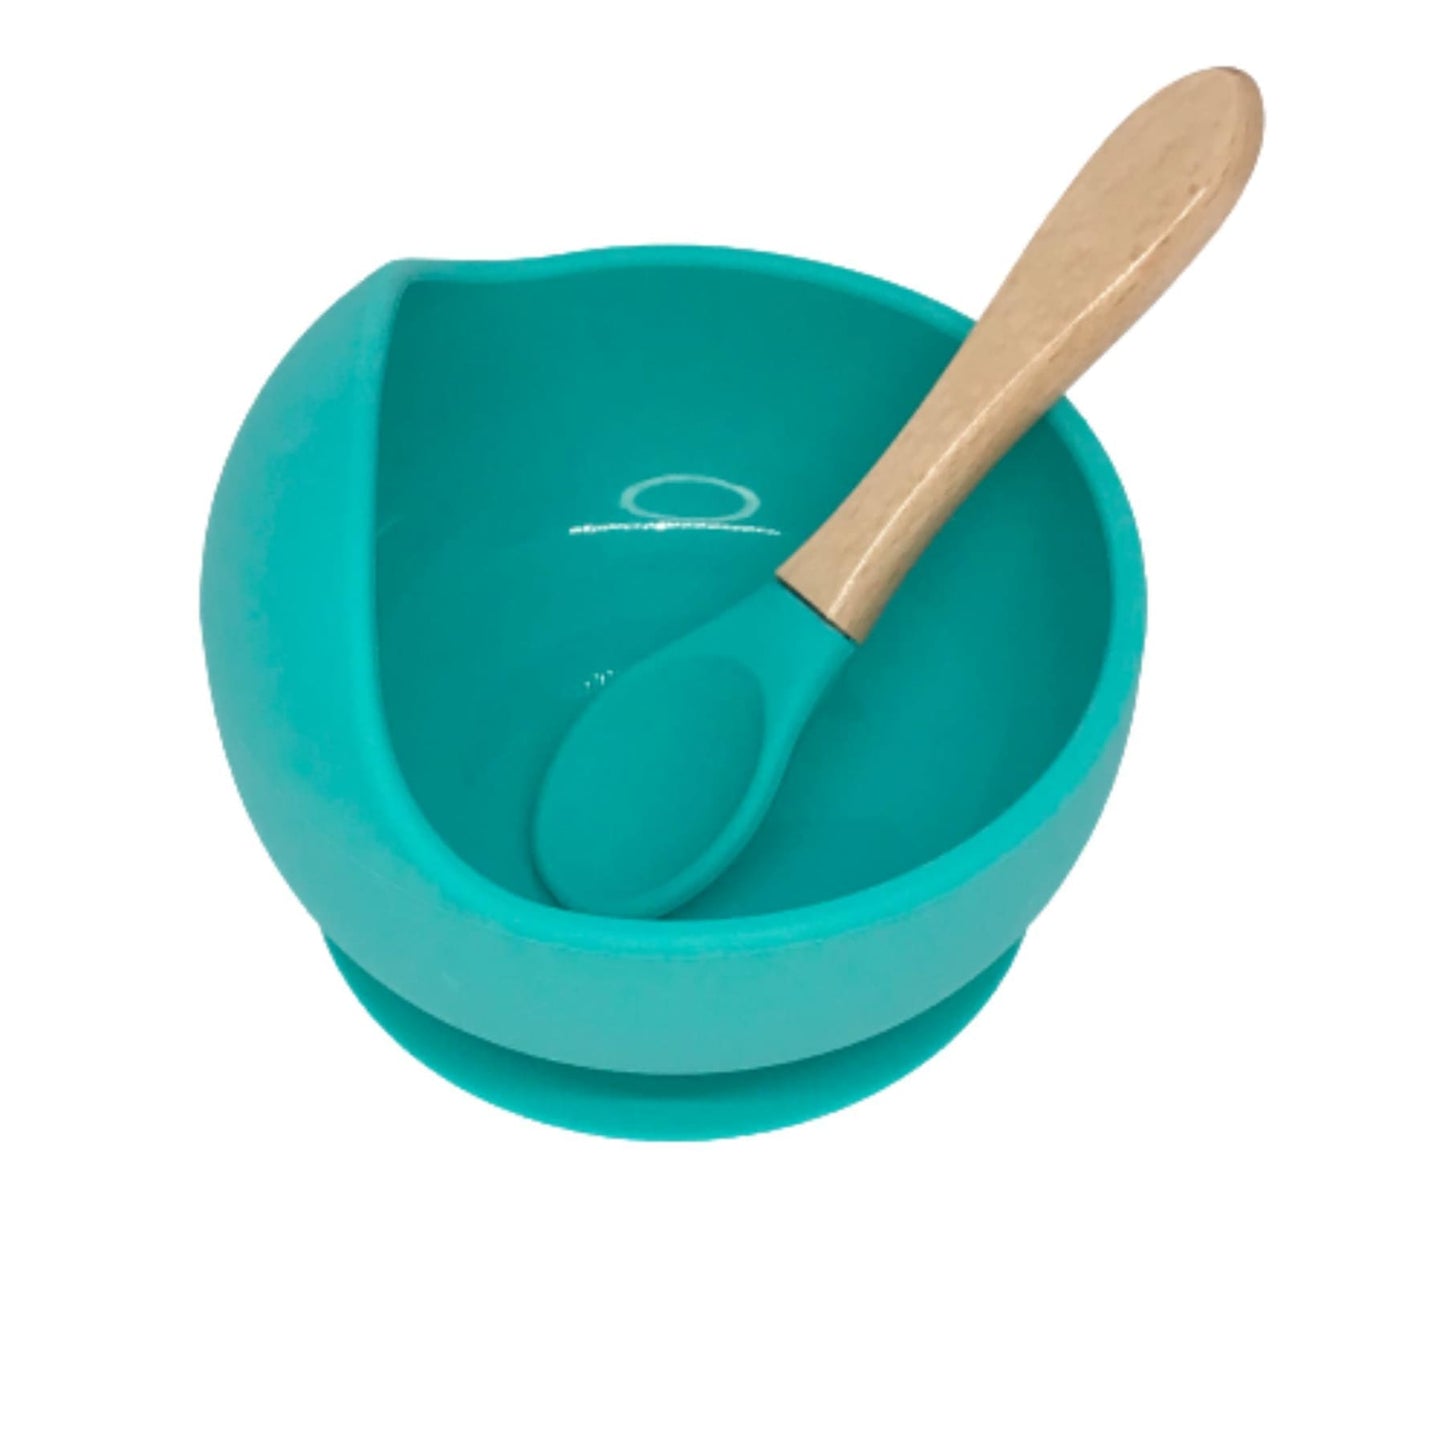 https://hunnybubbakids.com/cdn/shop/products/brush-tool-chair-silicone-suction-baby-bowl-and-spoon-hunny-bubba-kids-green-mint-972.jpg?v=1640401853&width=1445